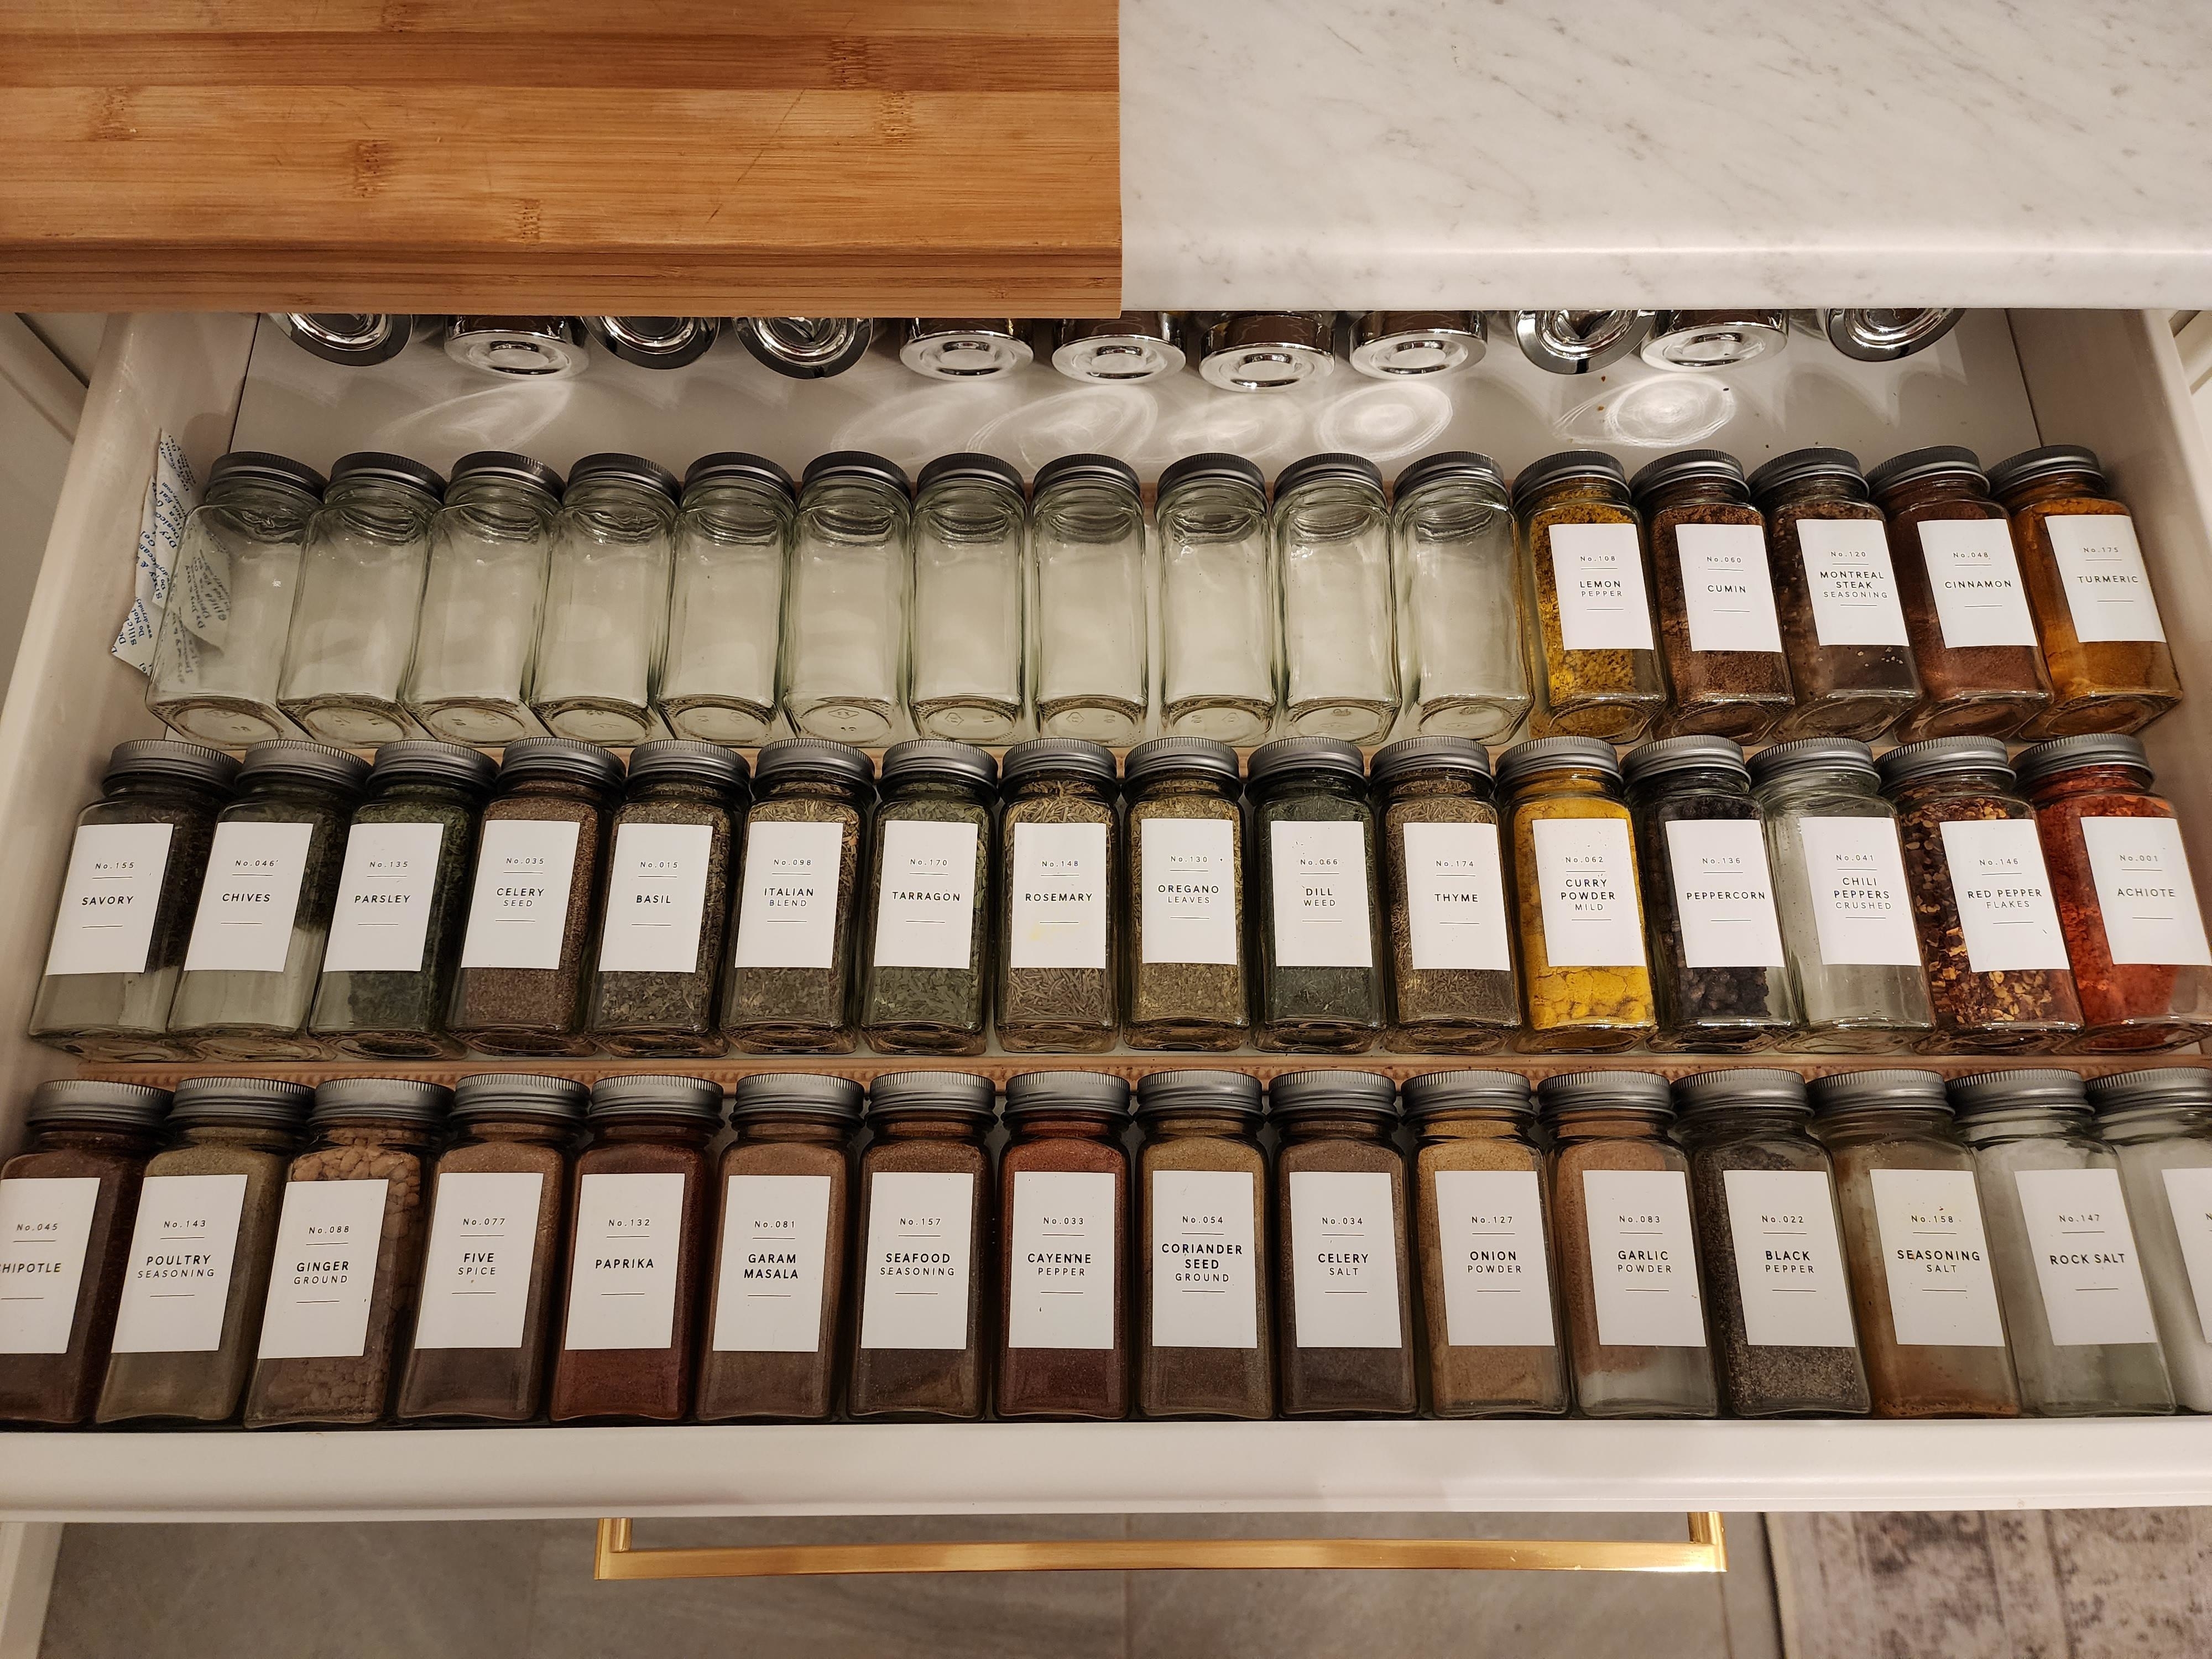 Spice jars lying flat in a large, slide-out drawer